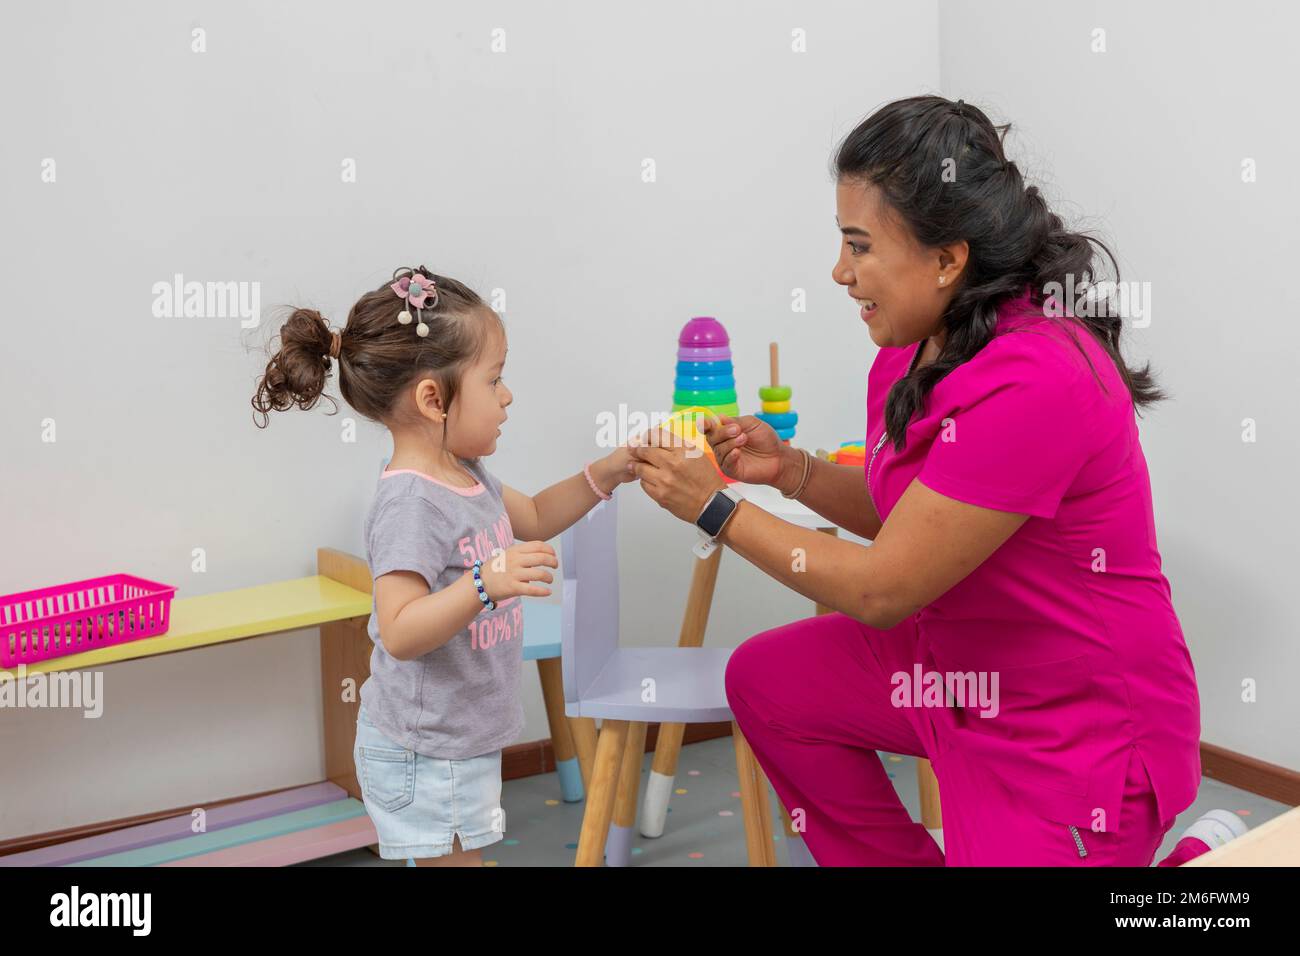 Pediatric doctor places a bracelet on a girl, as a reward after the consultation she gave her. Stock Photo